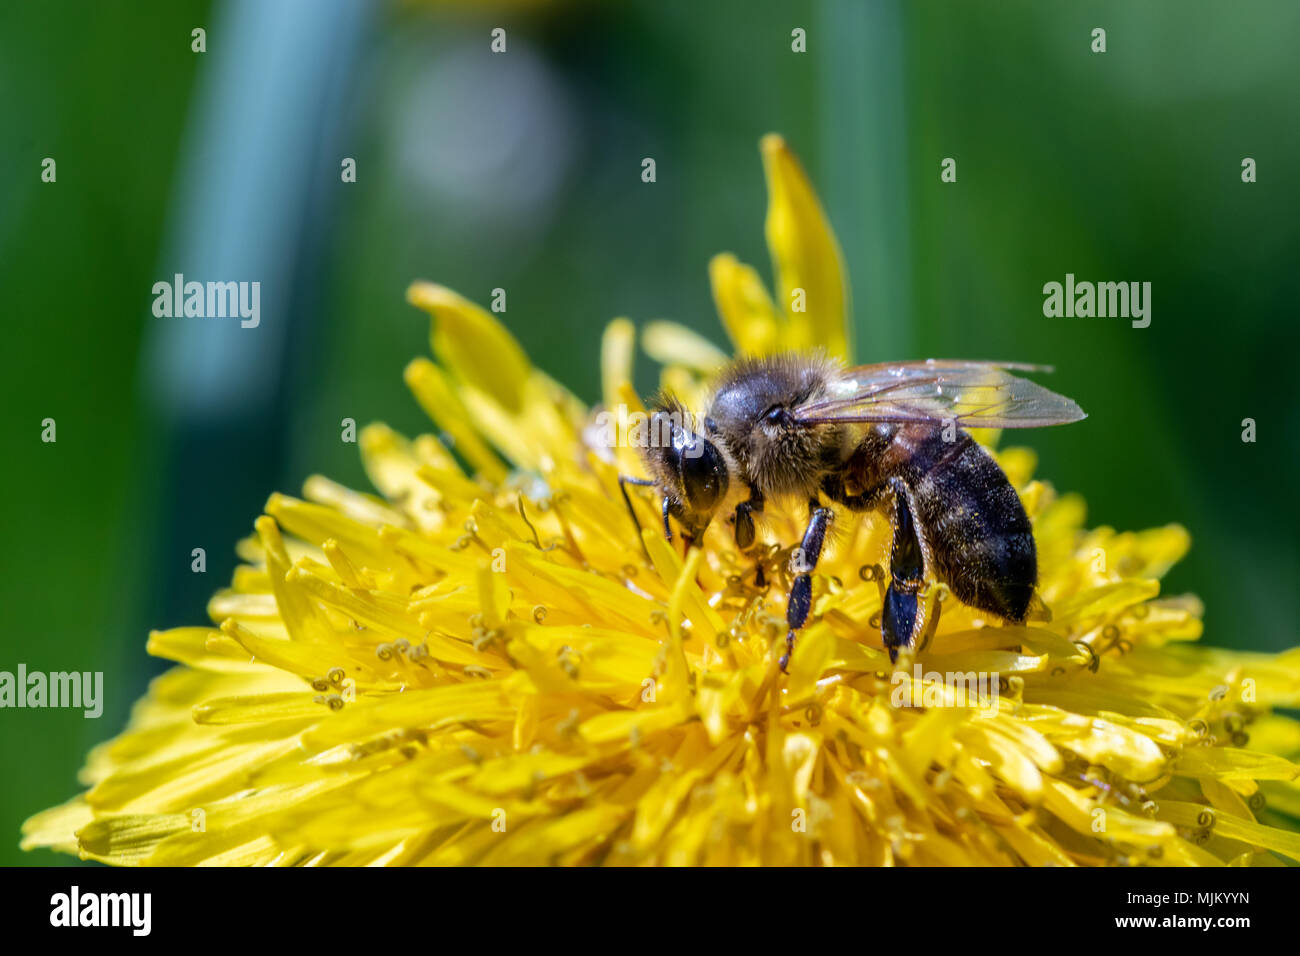 Working bee collecting pollen from a yellow dandelion. Close up macro view Stock Photo